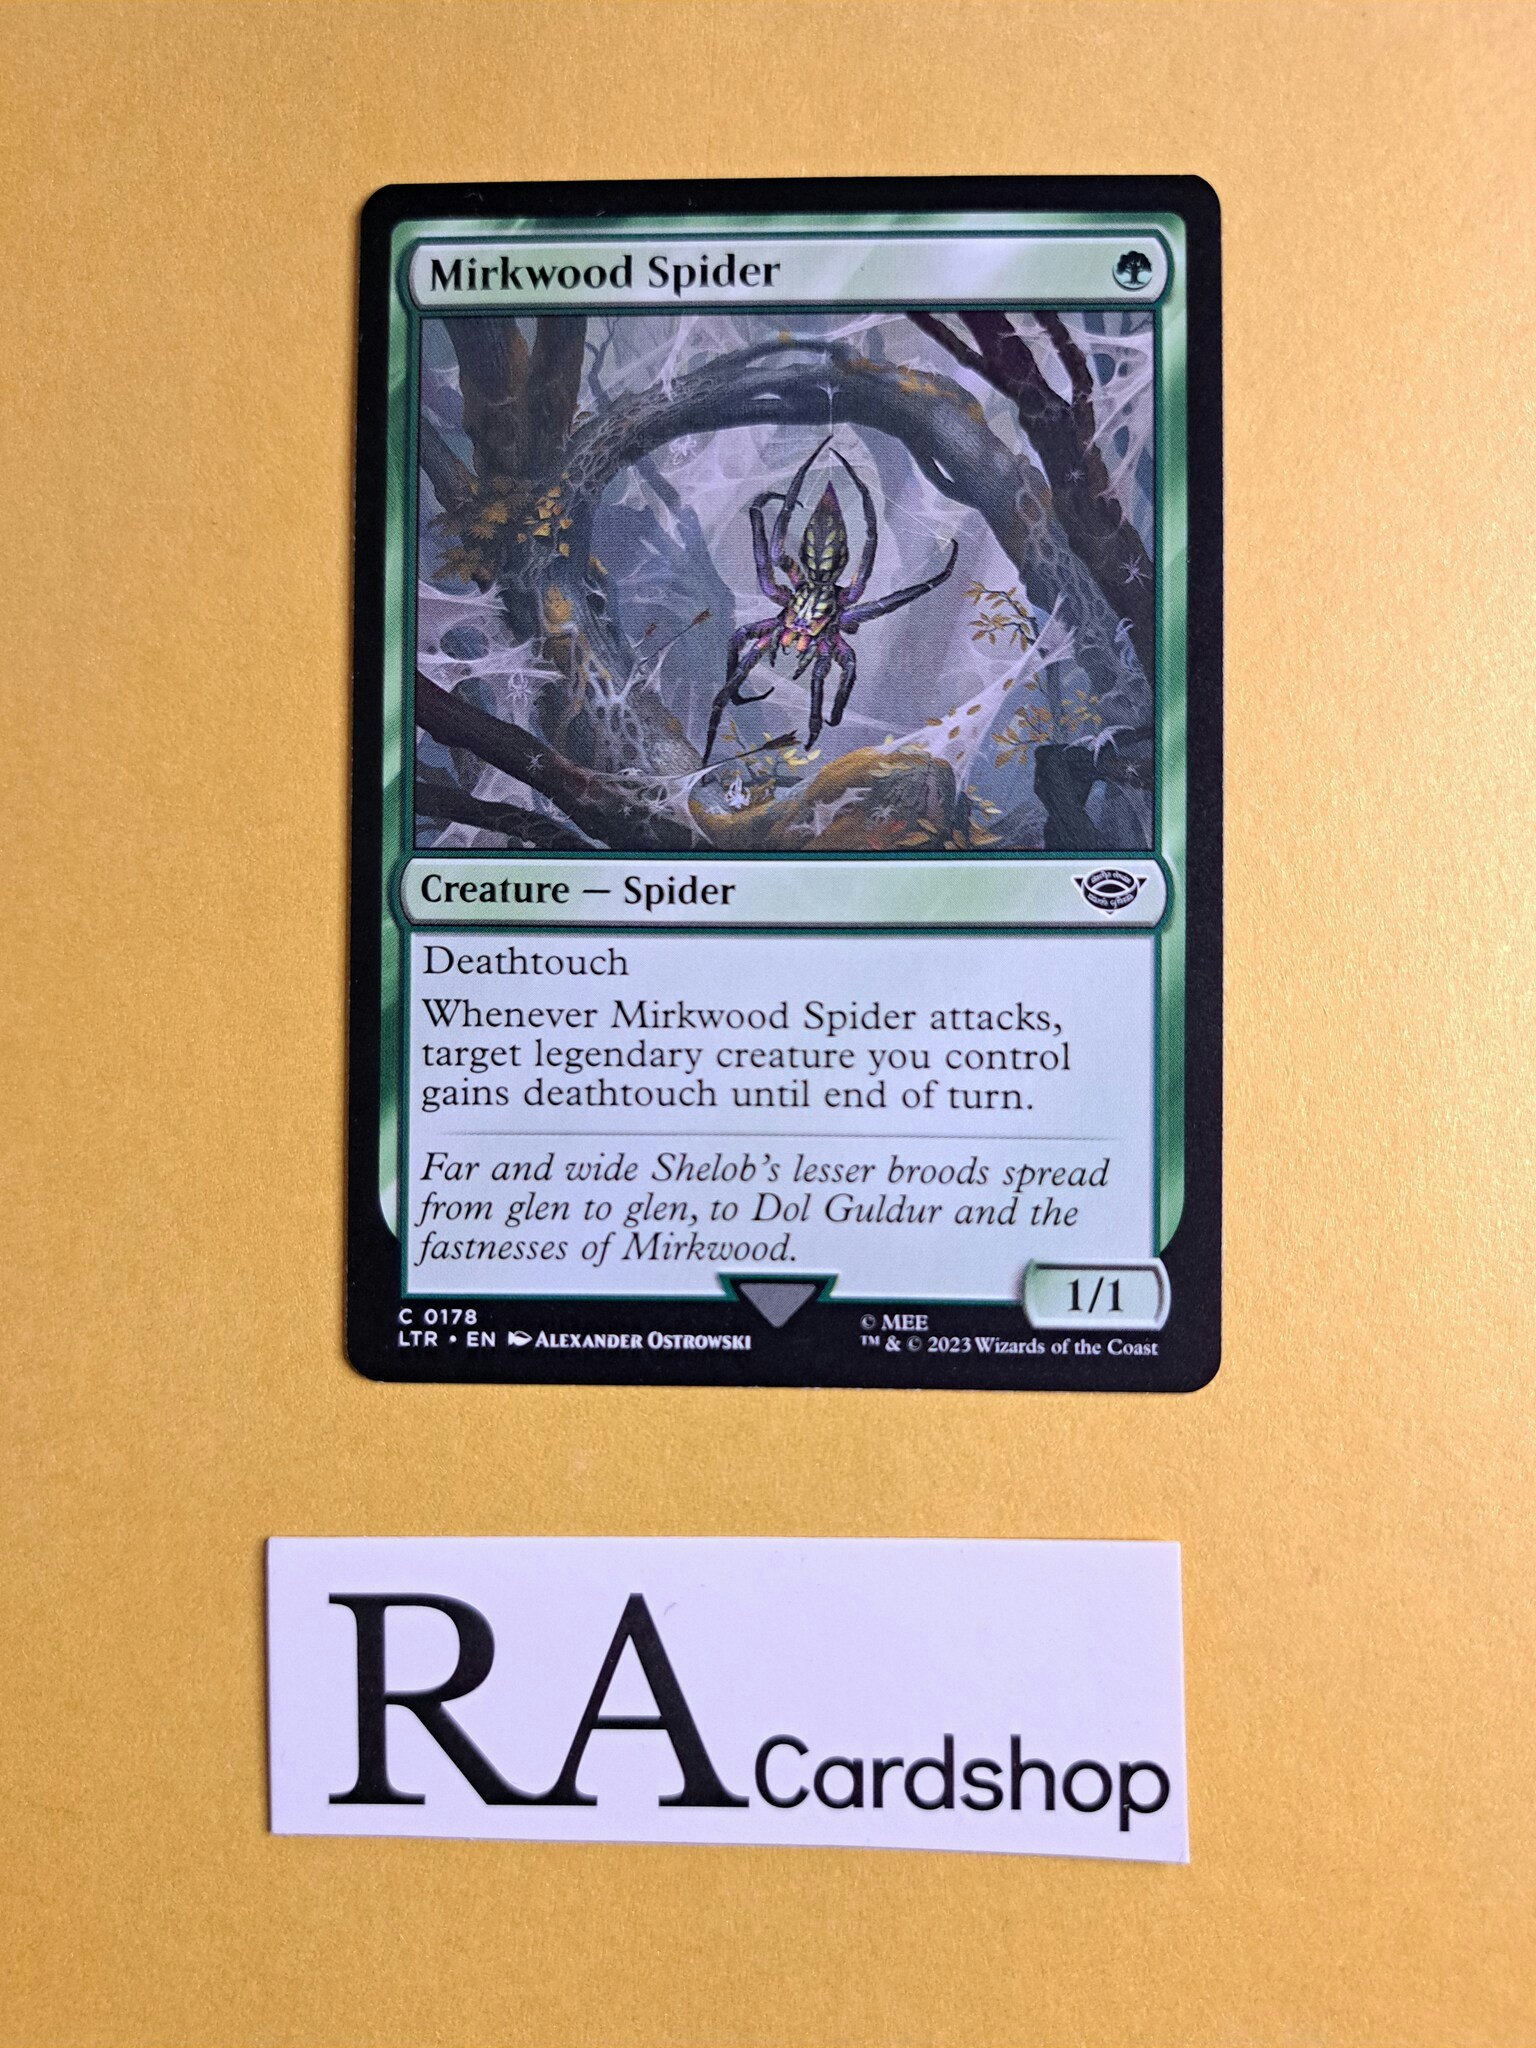 Mirkwood Spider Common 178 The Lord of the Rings Tales of Middle-earth Magic the Gathering